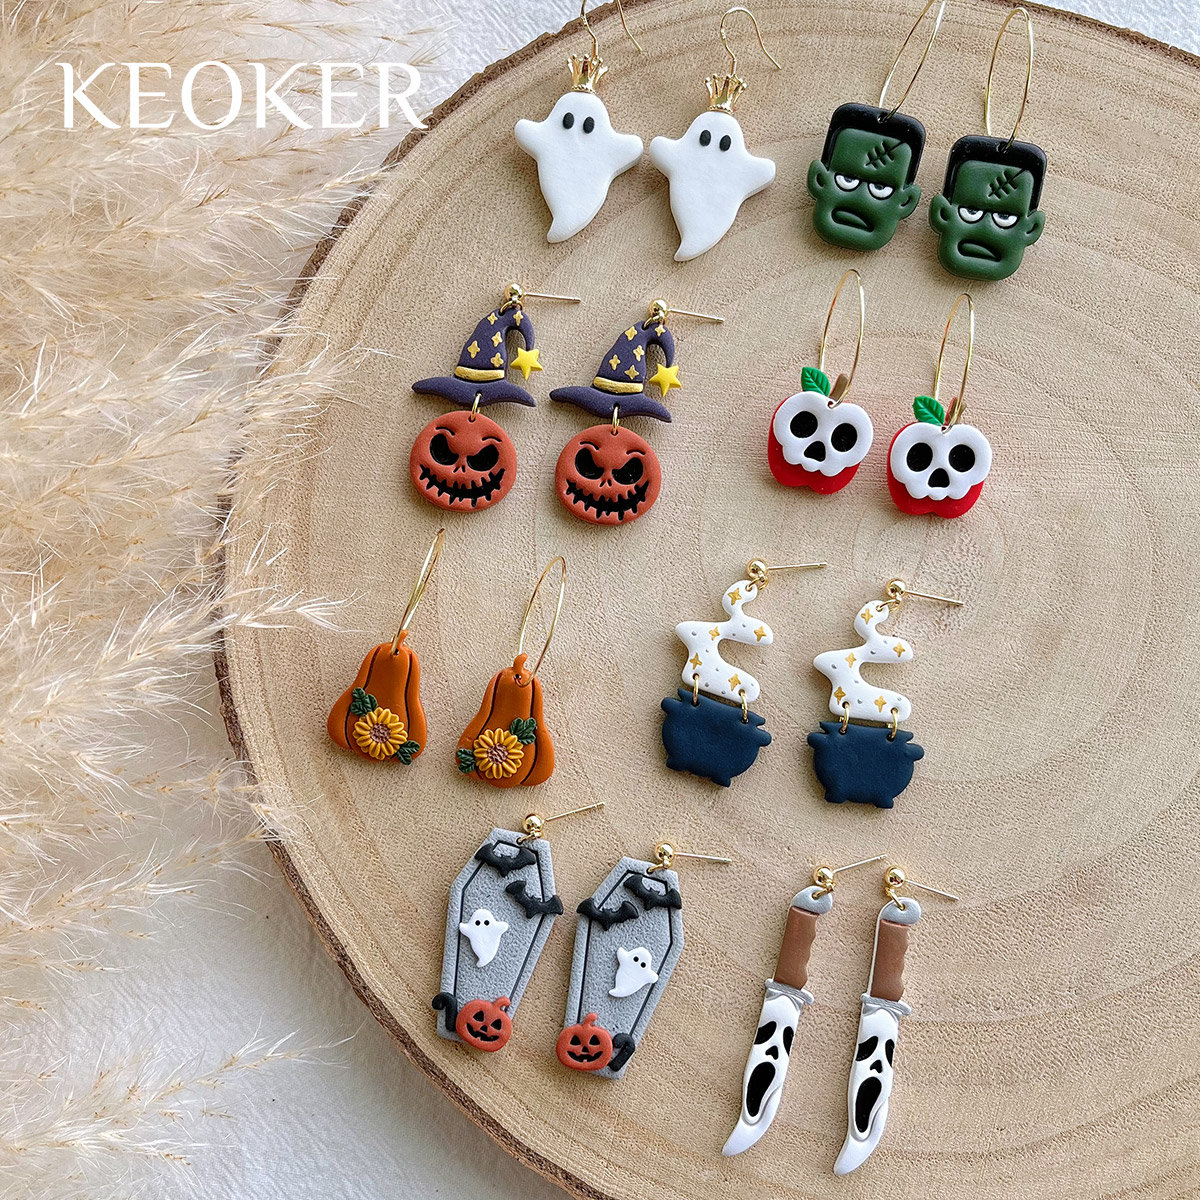 KEOKER Halloween Polymer Clay Cutters, Clay Cutters for Halloween Earrings  Making, 20 Shapes Halloween Clay Earrings Cutters 